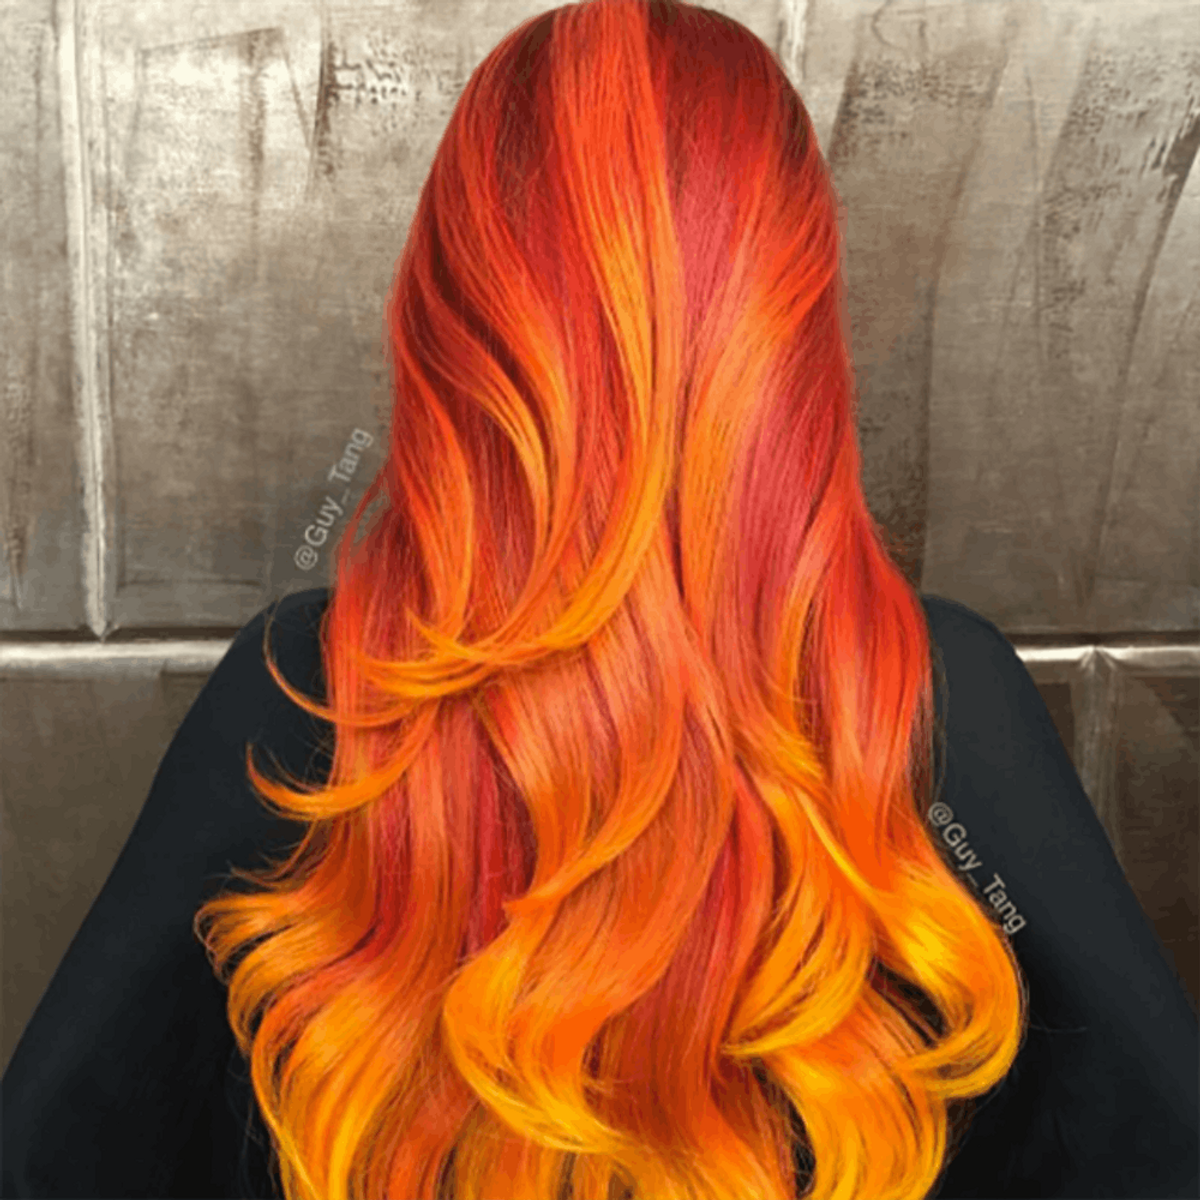 Phoenix Hair Is the Craziest Hair Trend You’ll See This Season